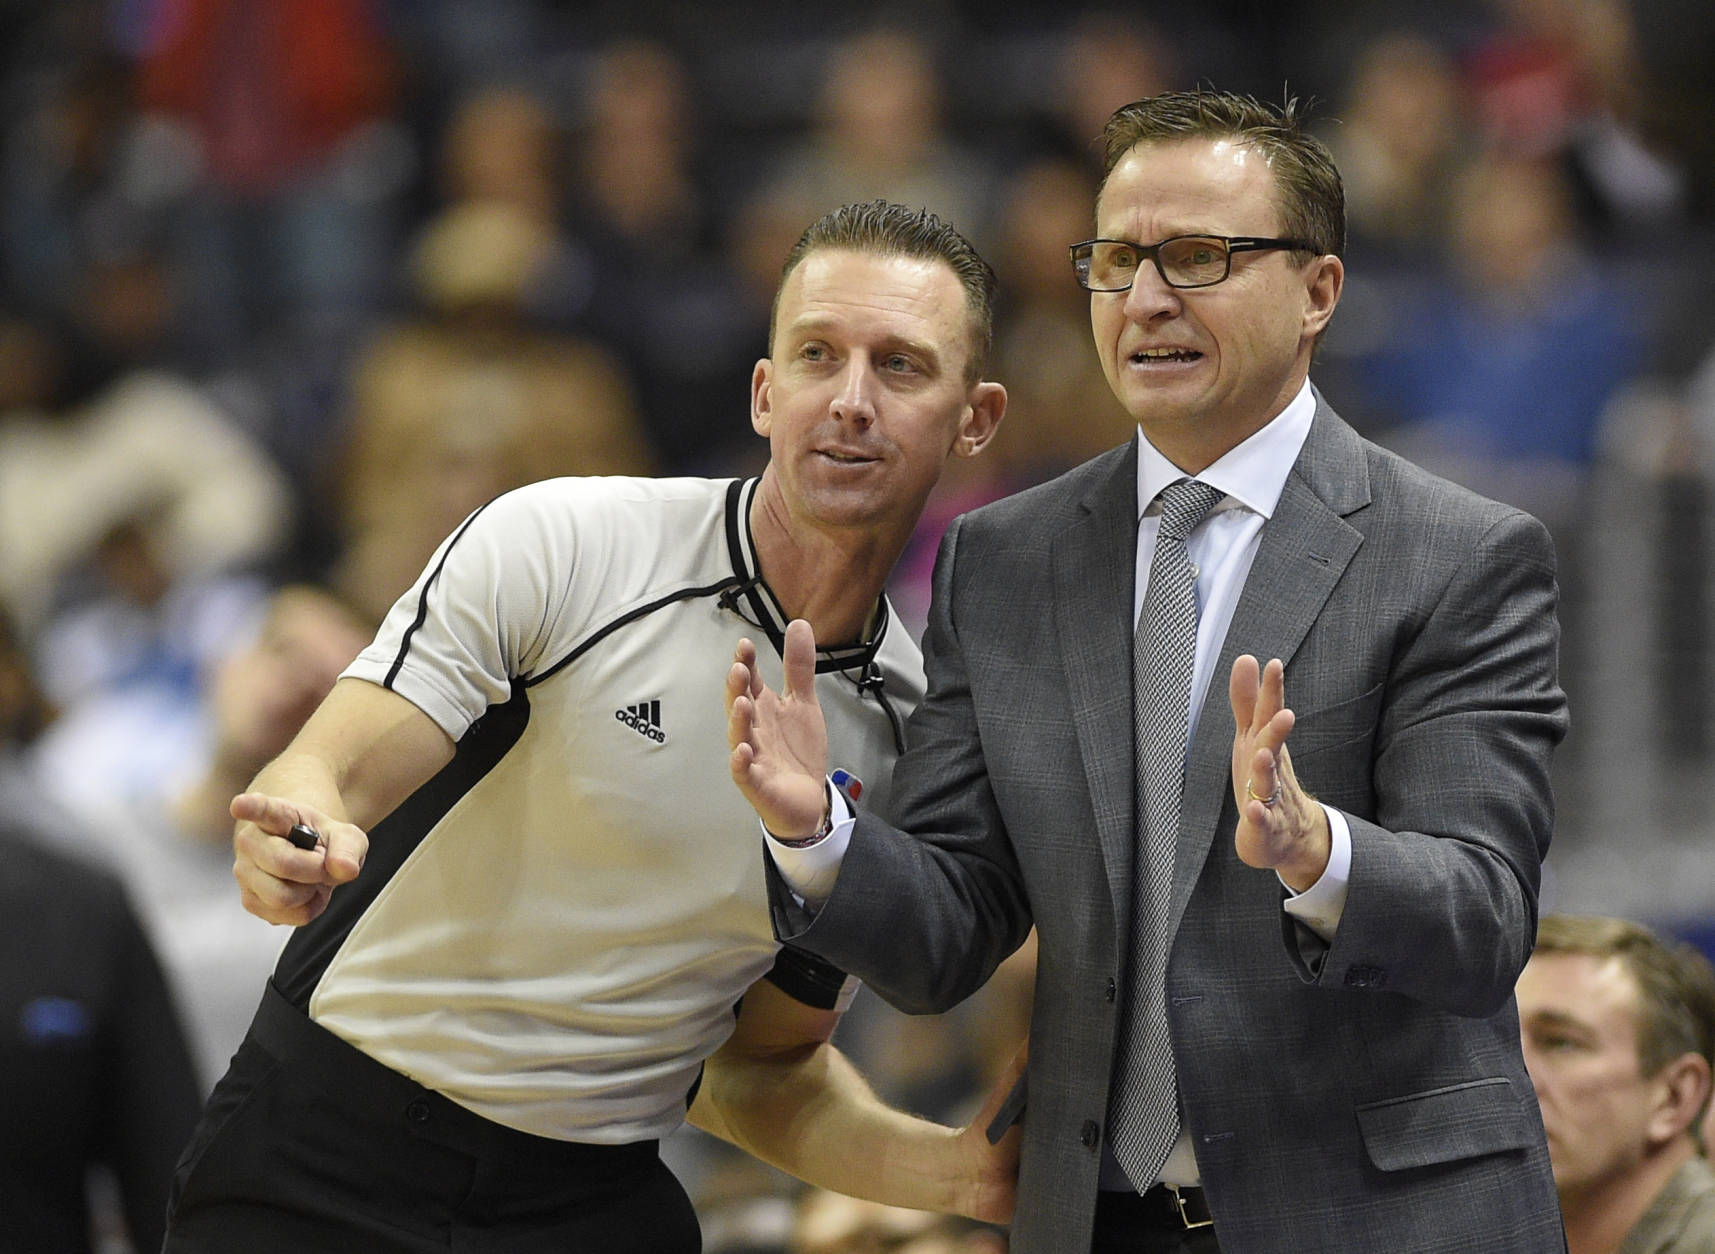 Washington Wizards head coach Scott Brooks, right, gestures next to referee Justin Van Duyne, left, during the second half of an NBA basketball game against the Denver Nuggets, Thursday, Dec. 8, 2016, in Washington. The Wizards won 92-85. (AP Photo/Nick Wass)